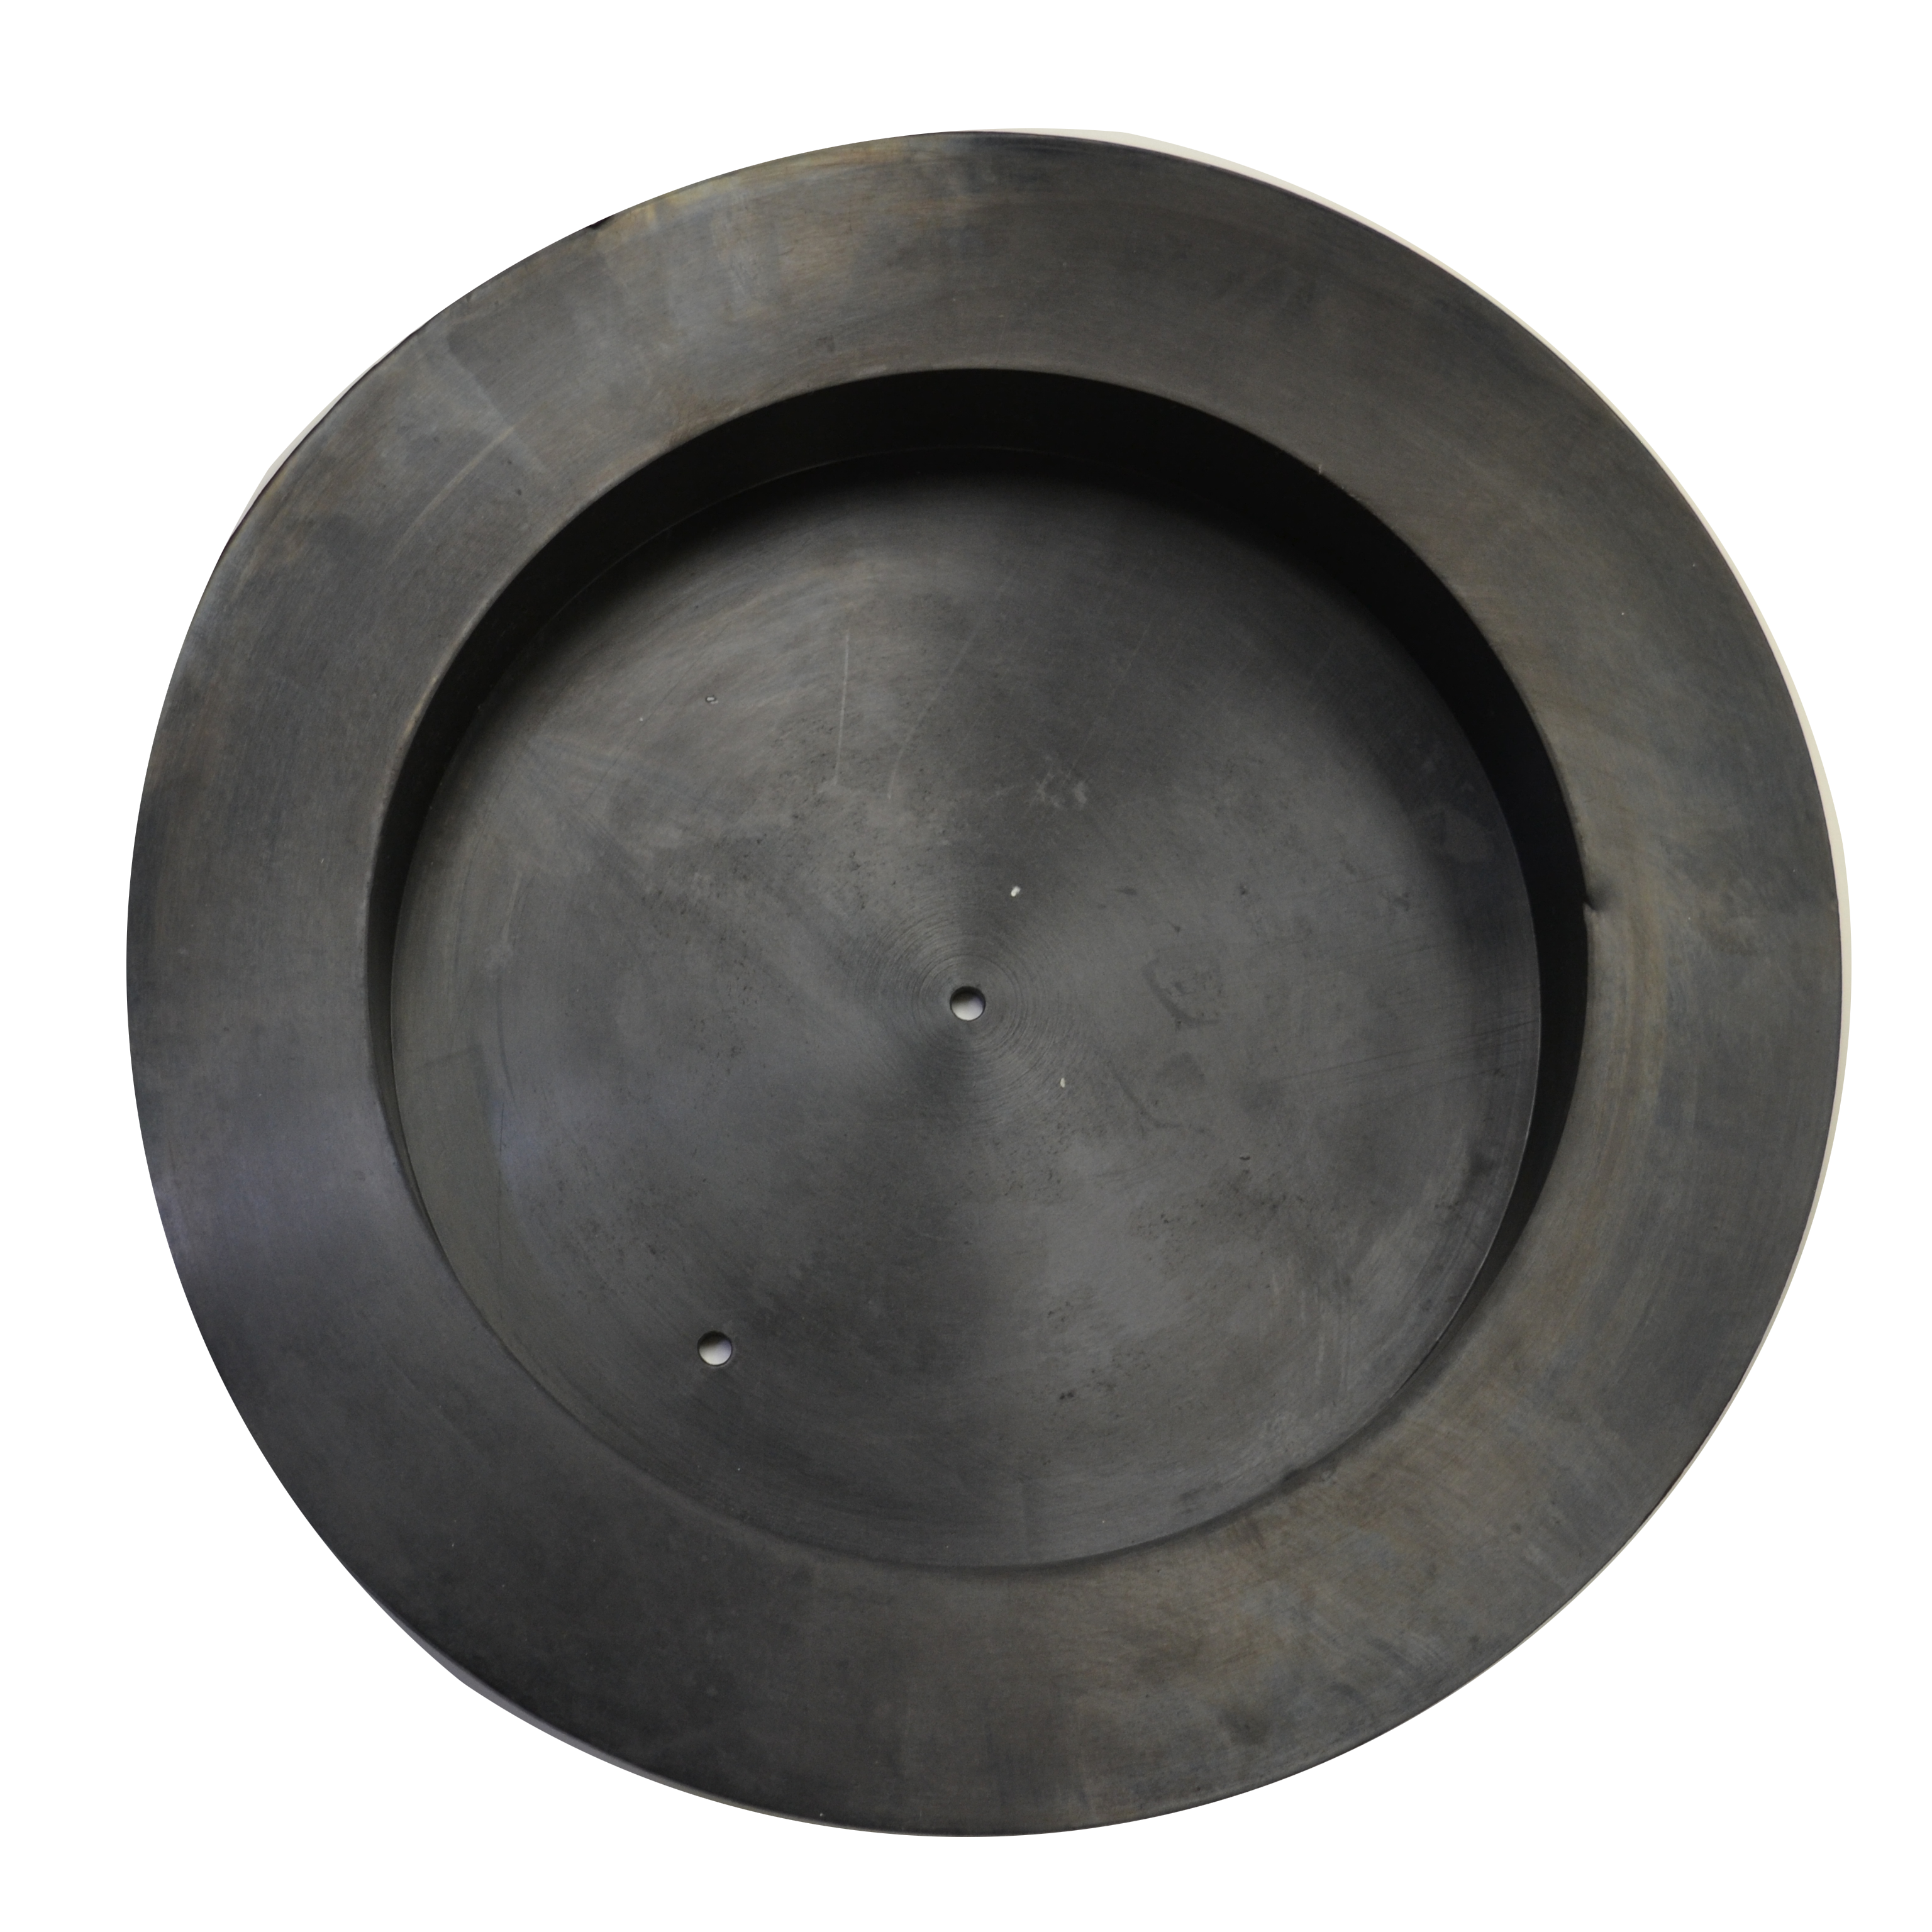 Fill Hole Cover Gasket 9 1/4"